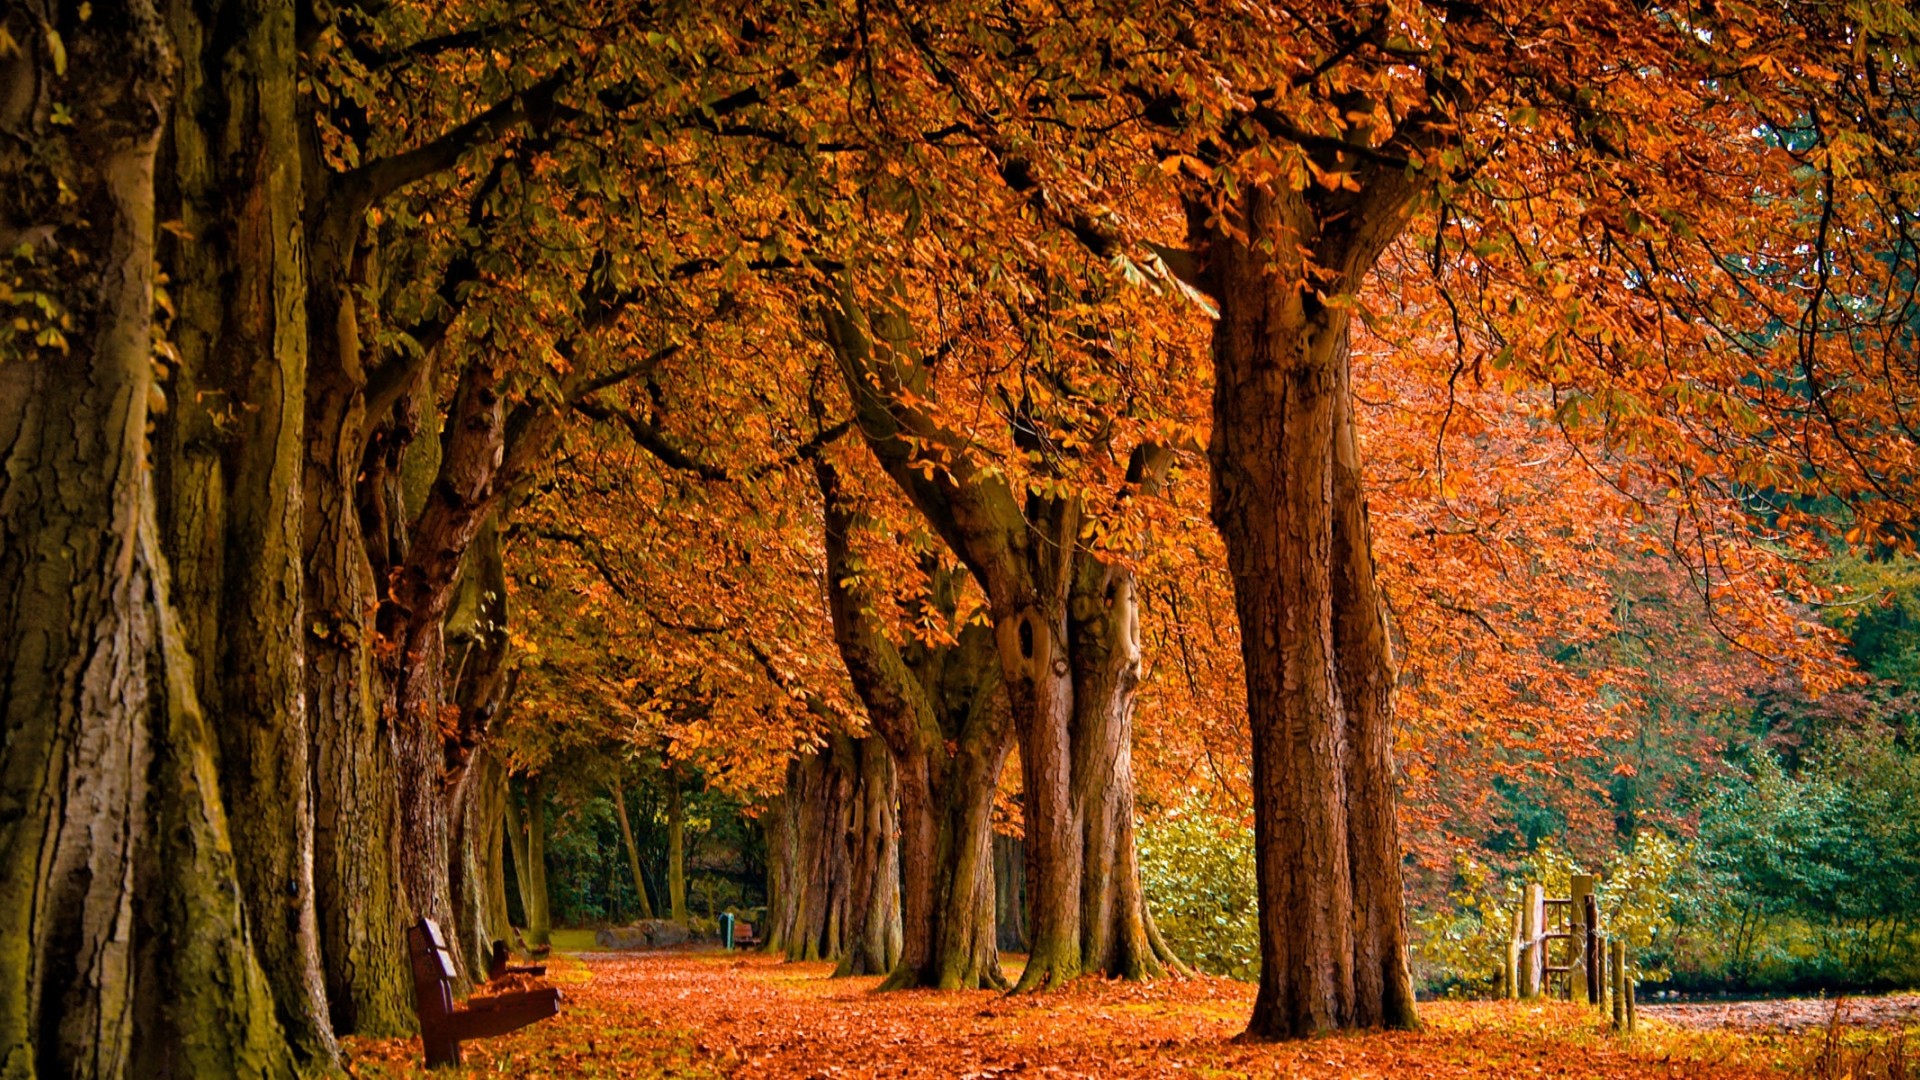 1920x1080 Fall Desktop Backgrounds Free Download Photo.